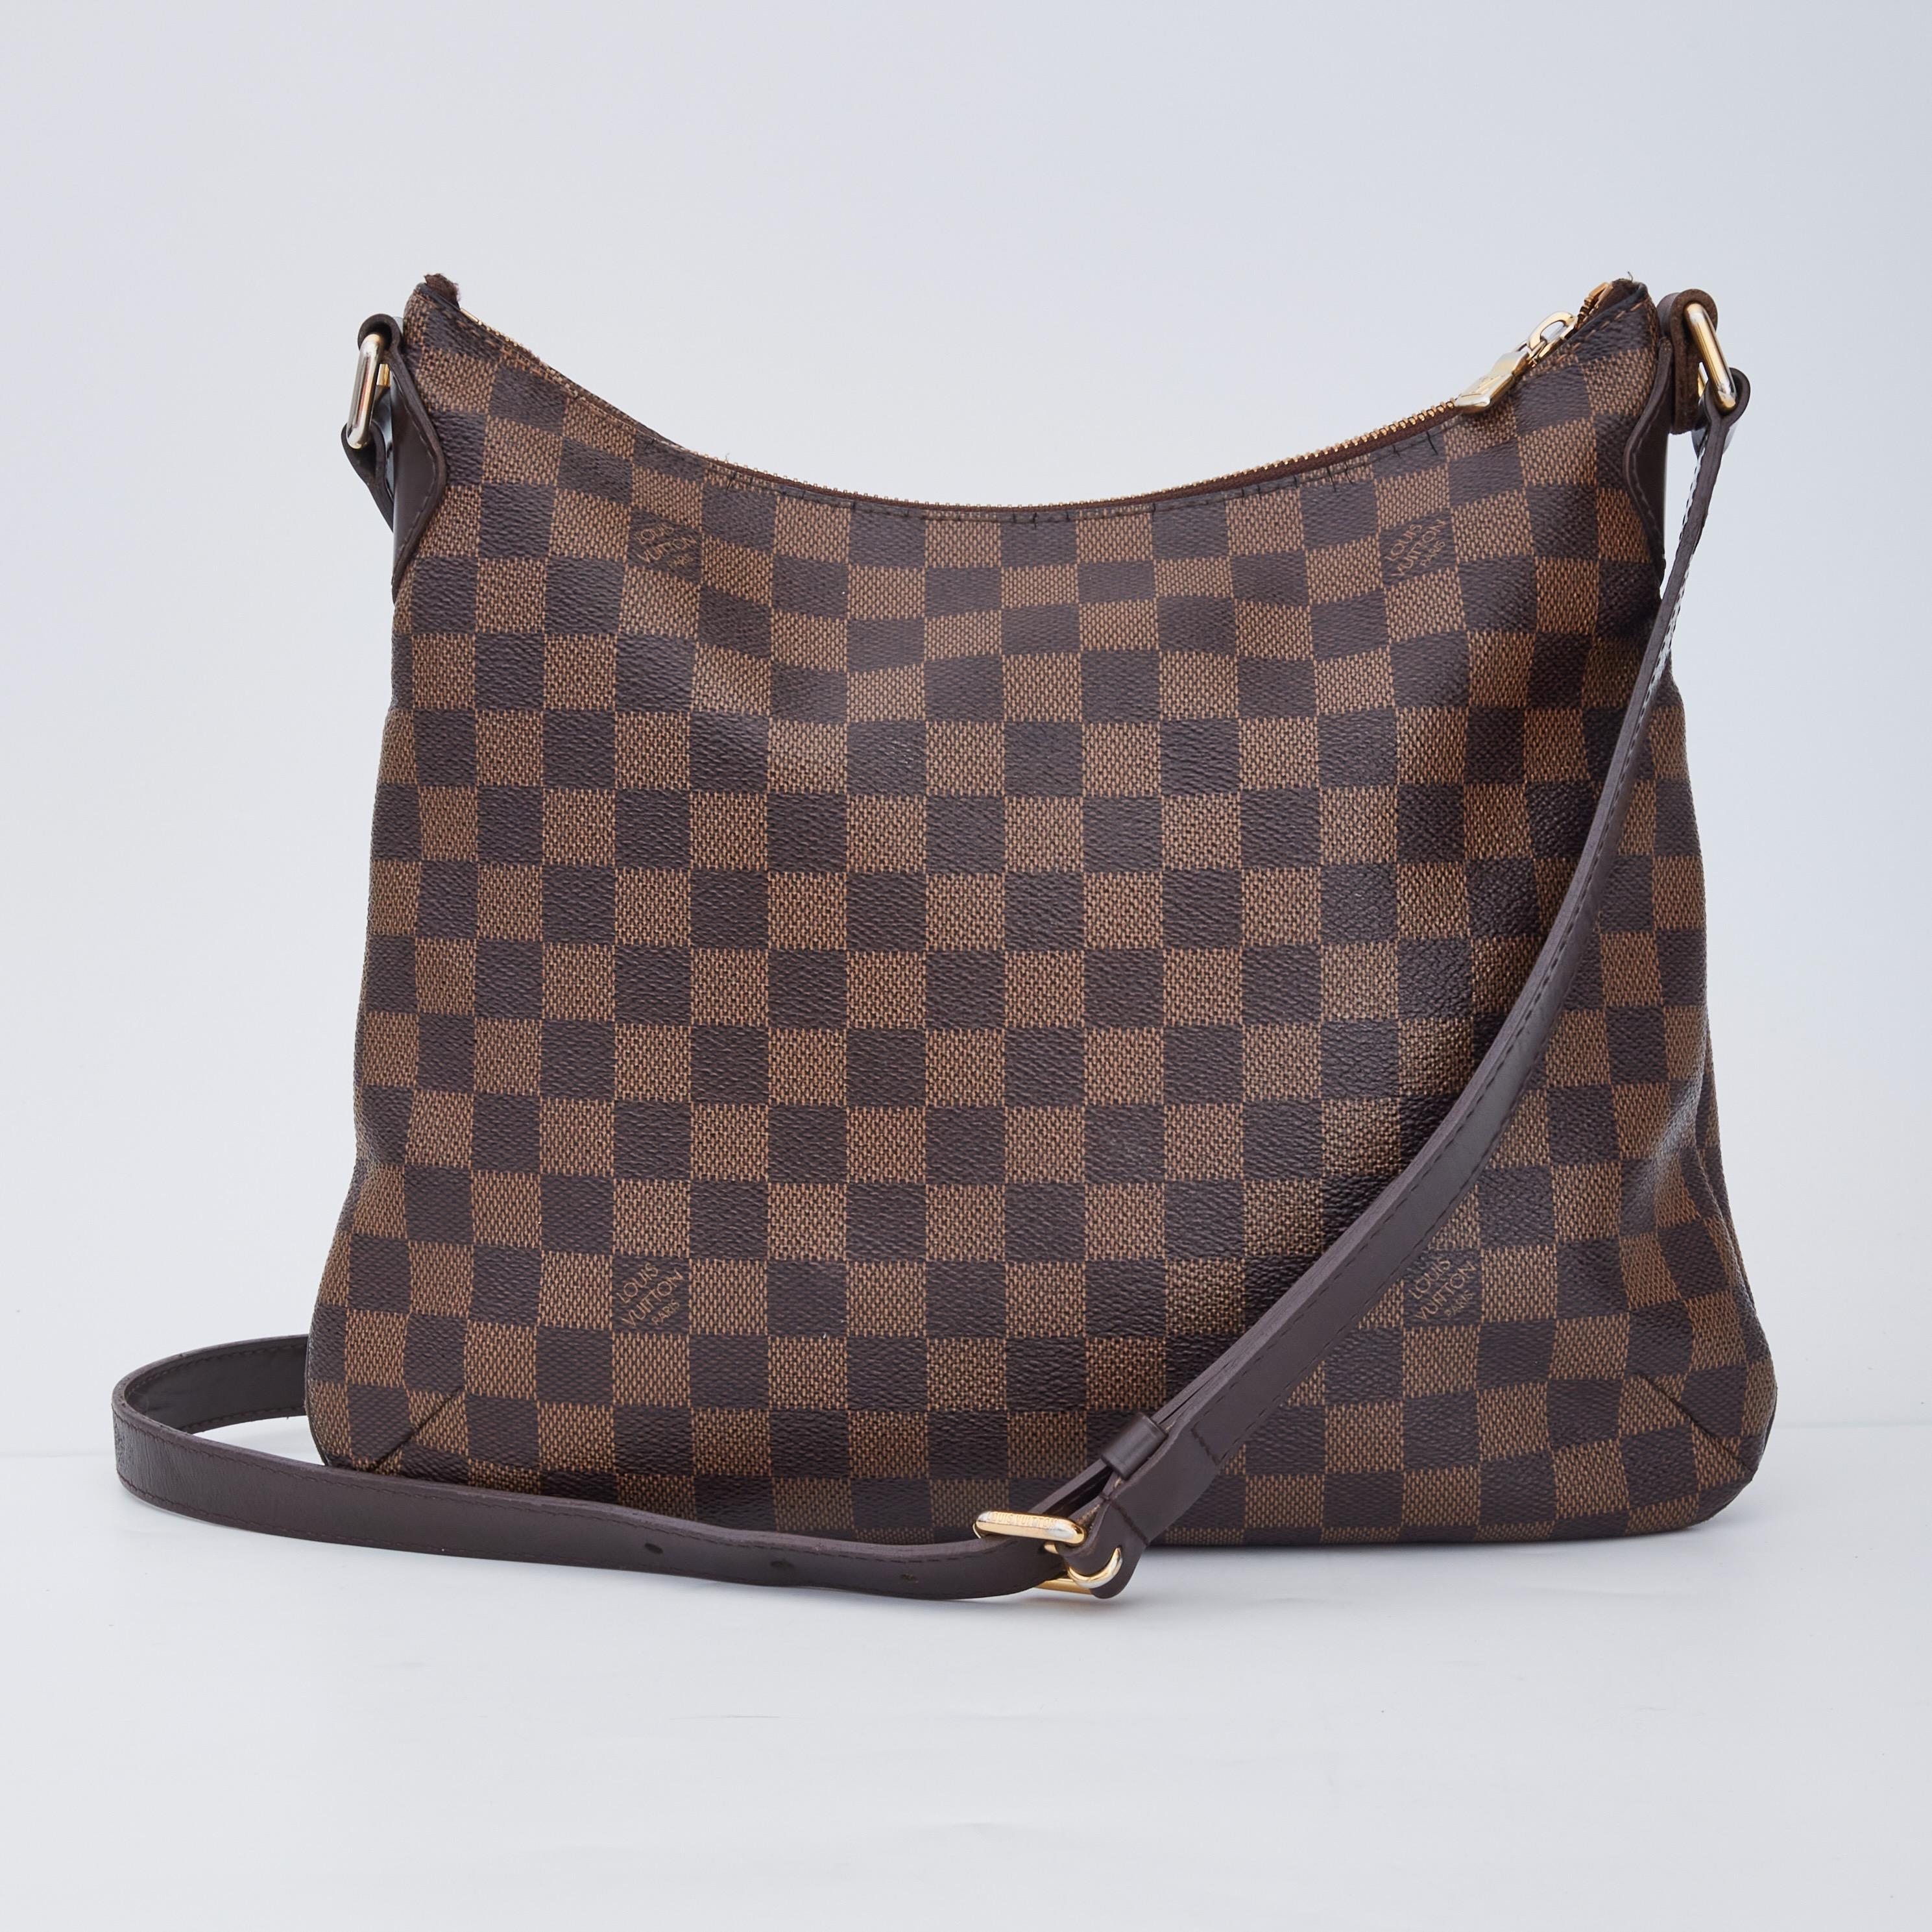 This shoulder bag is made of Louis Vuitton damier pleated coated canvas with a full facing patch pocket. The bag features a complimentary dark chocolate leather adjustable shoulder strap with a brass adjustment buckle and brass links. The top zipper